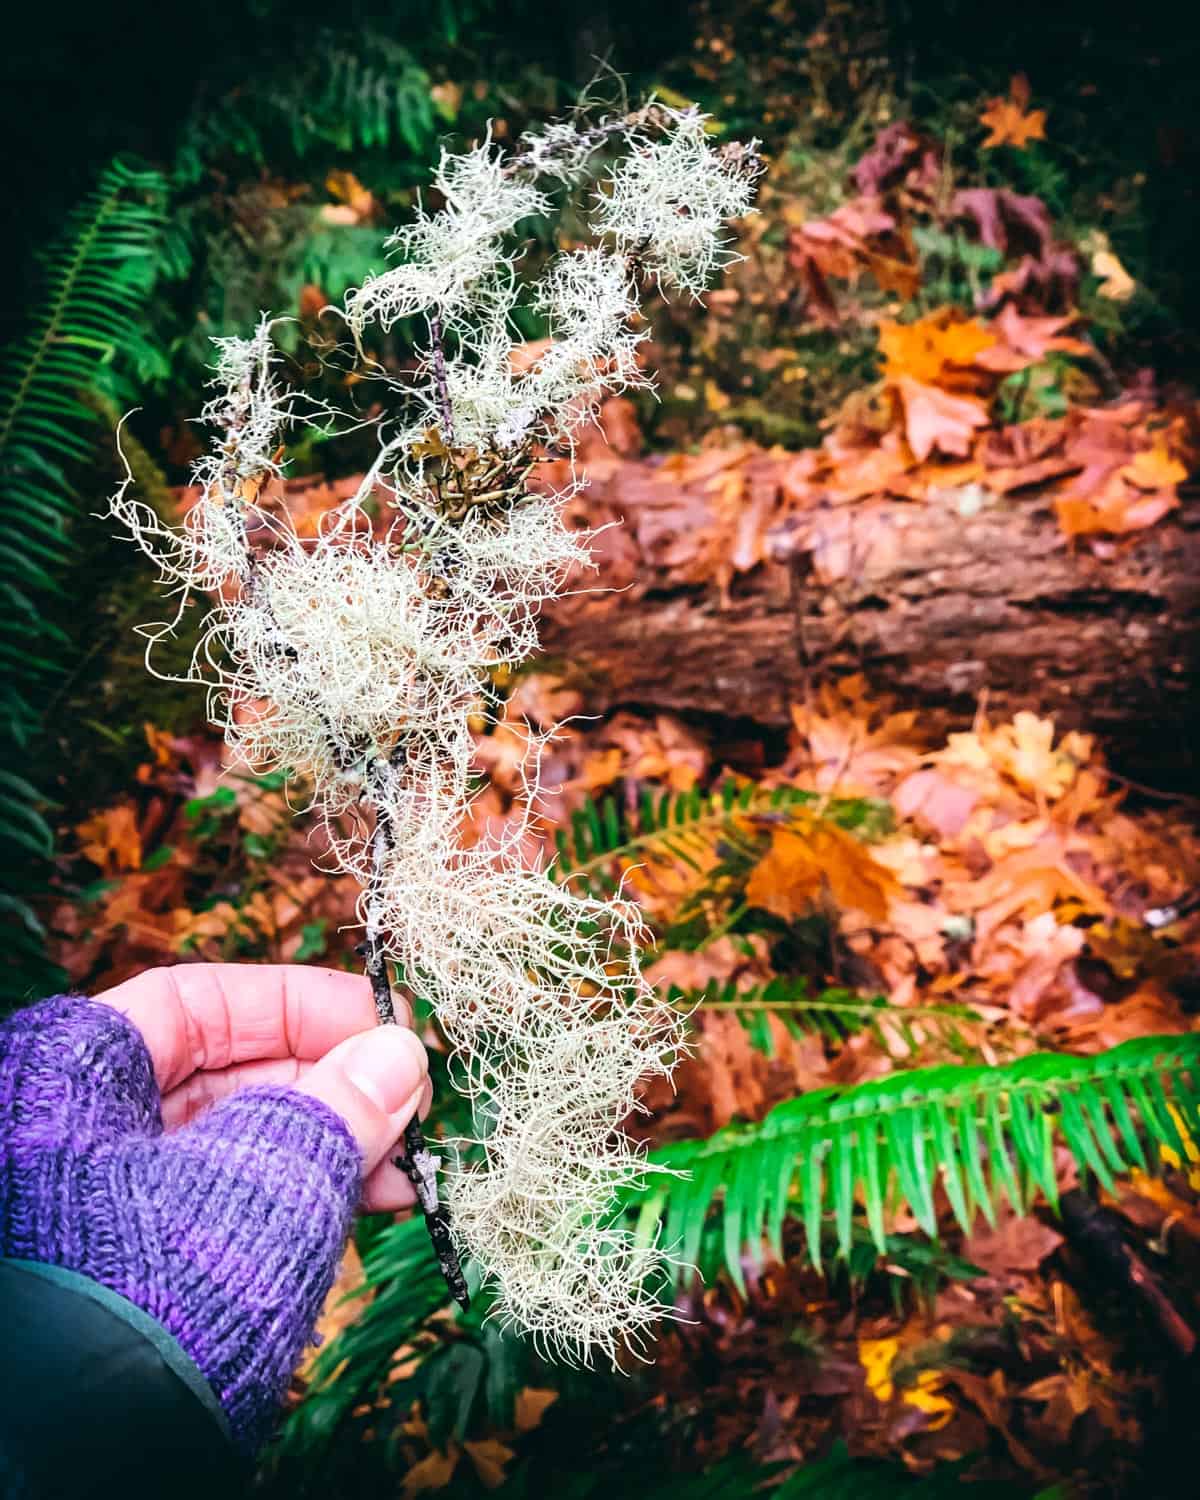 a hand holding a twig covered in usena lichen